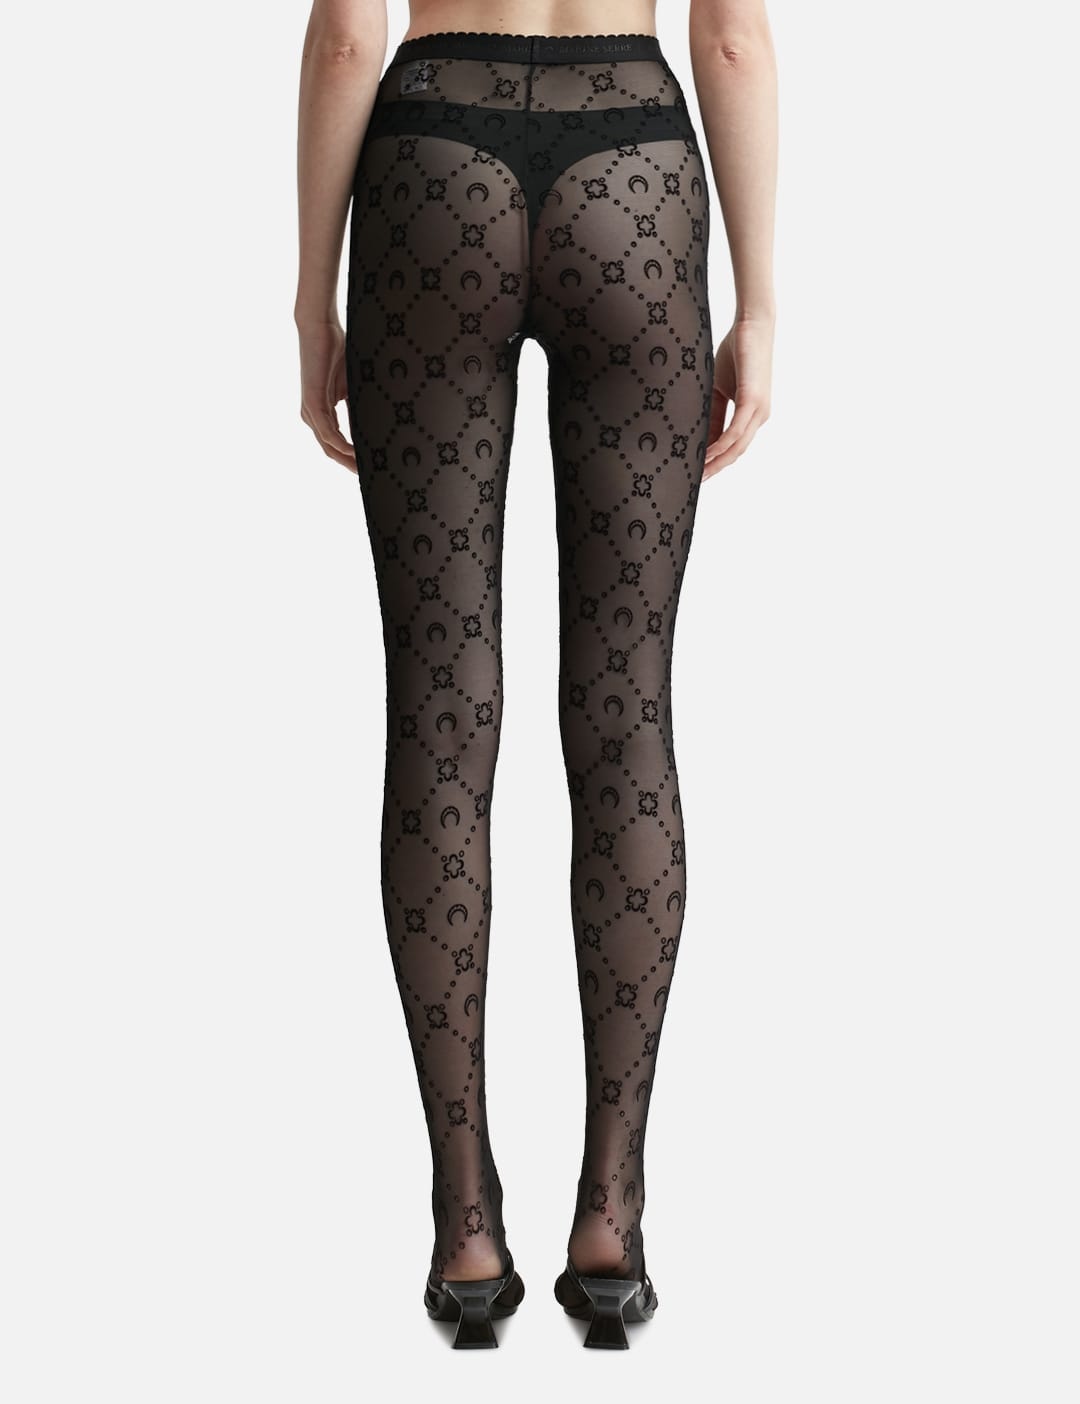 RECYCLED MOON FISHNET TIGHTS